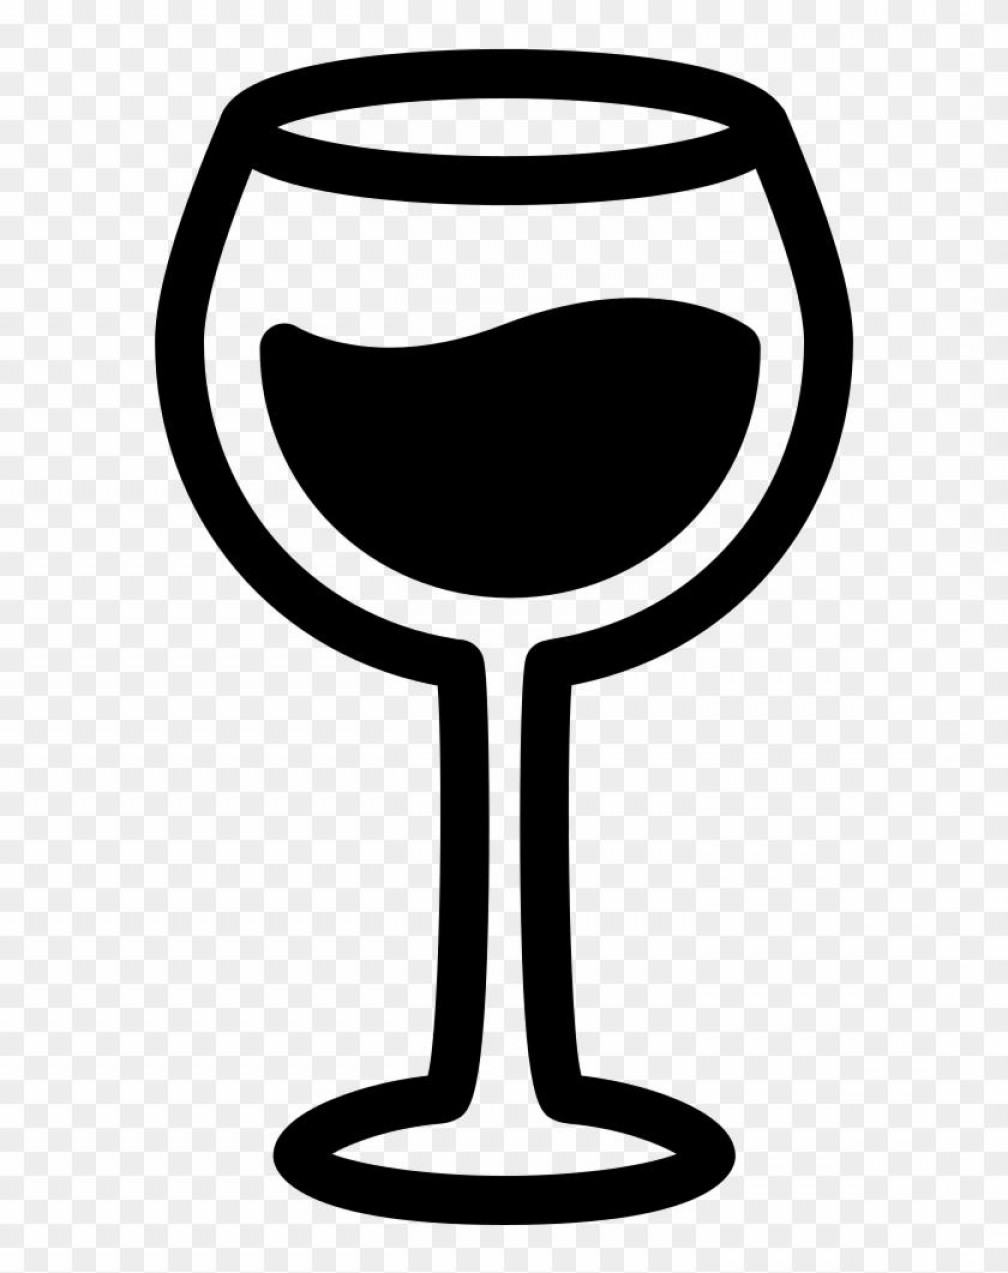 Download wine glass clipart jpg 10 free Cliparts | Download images ...